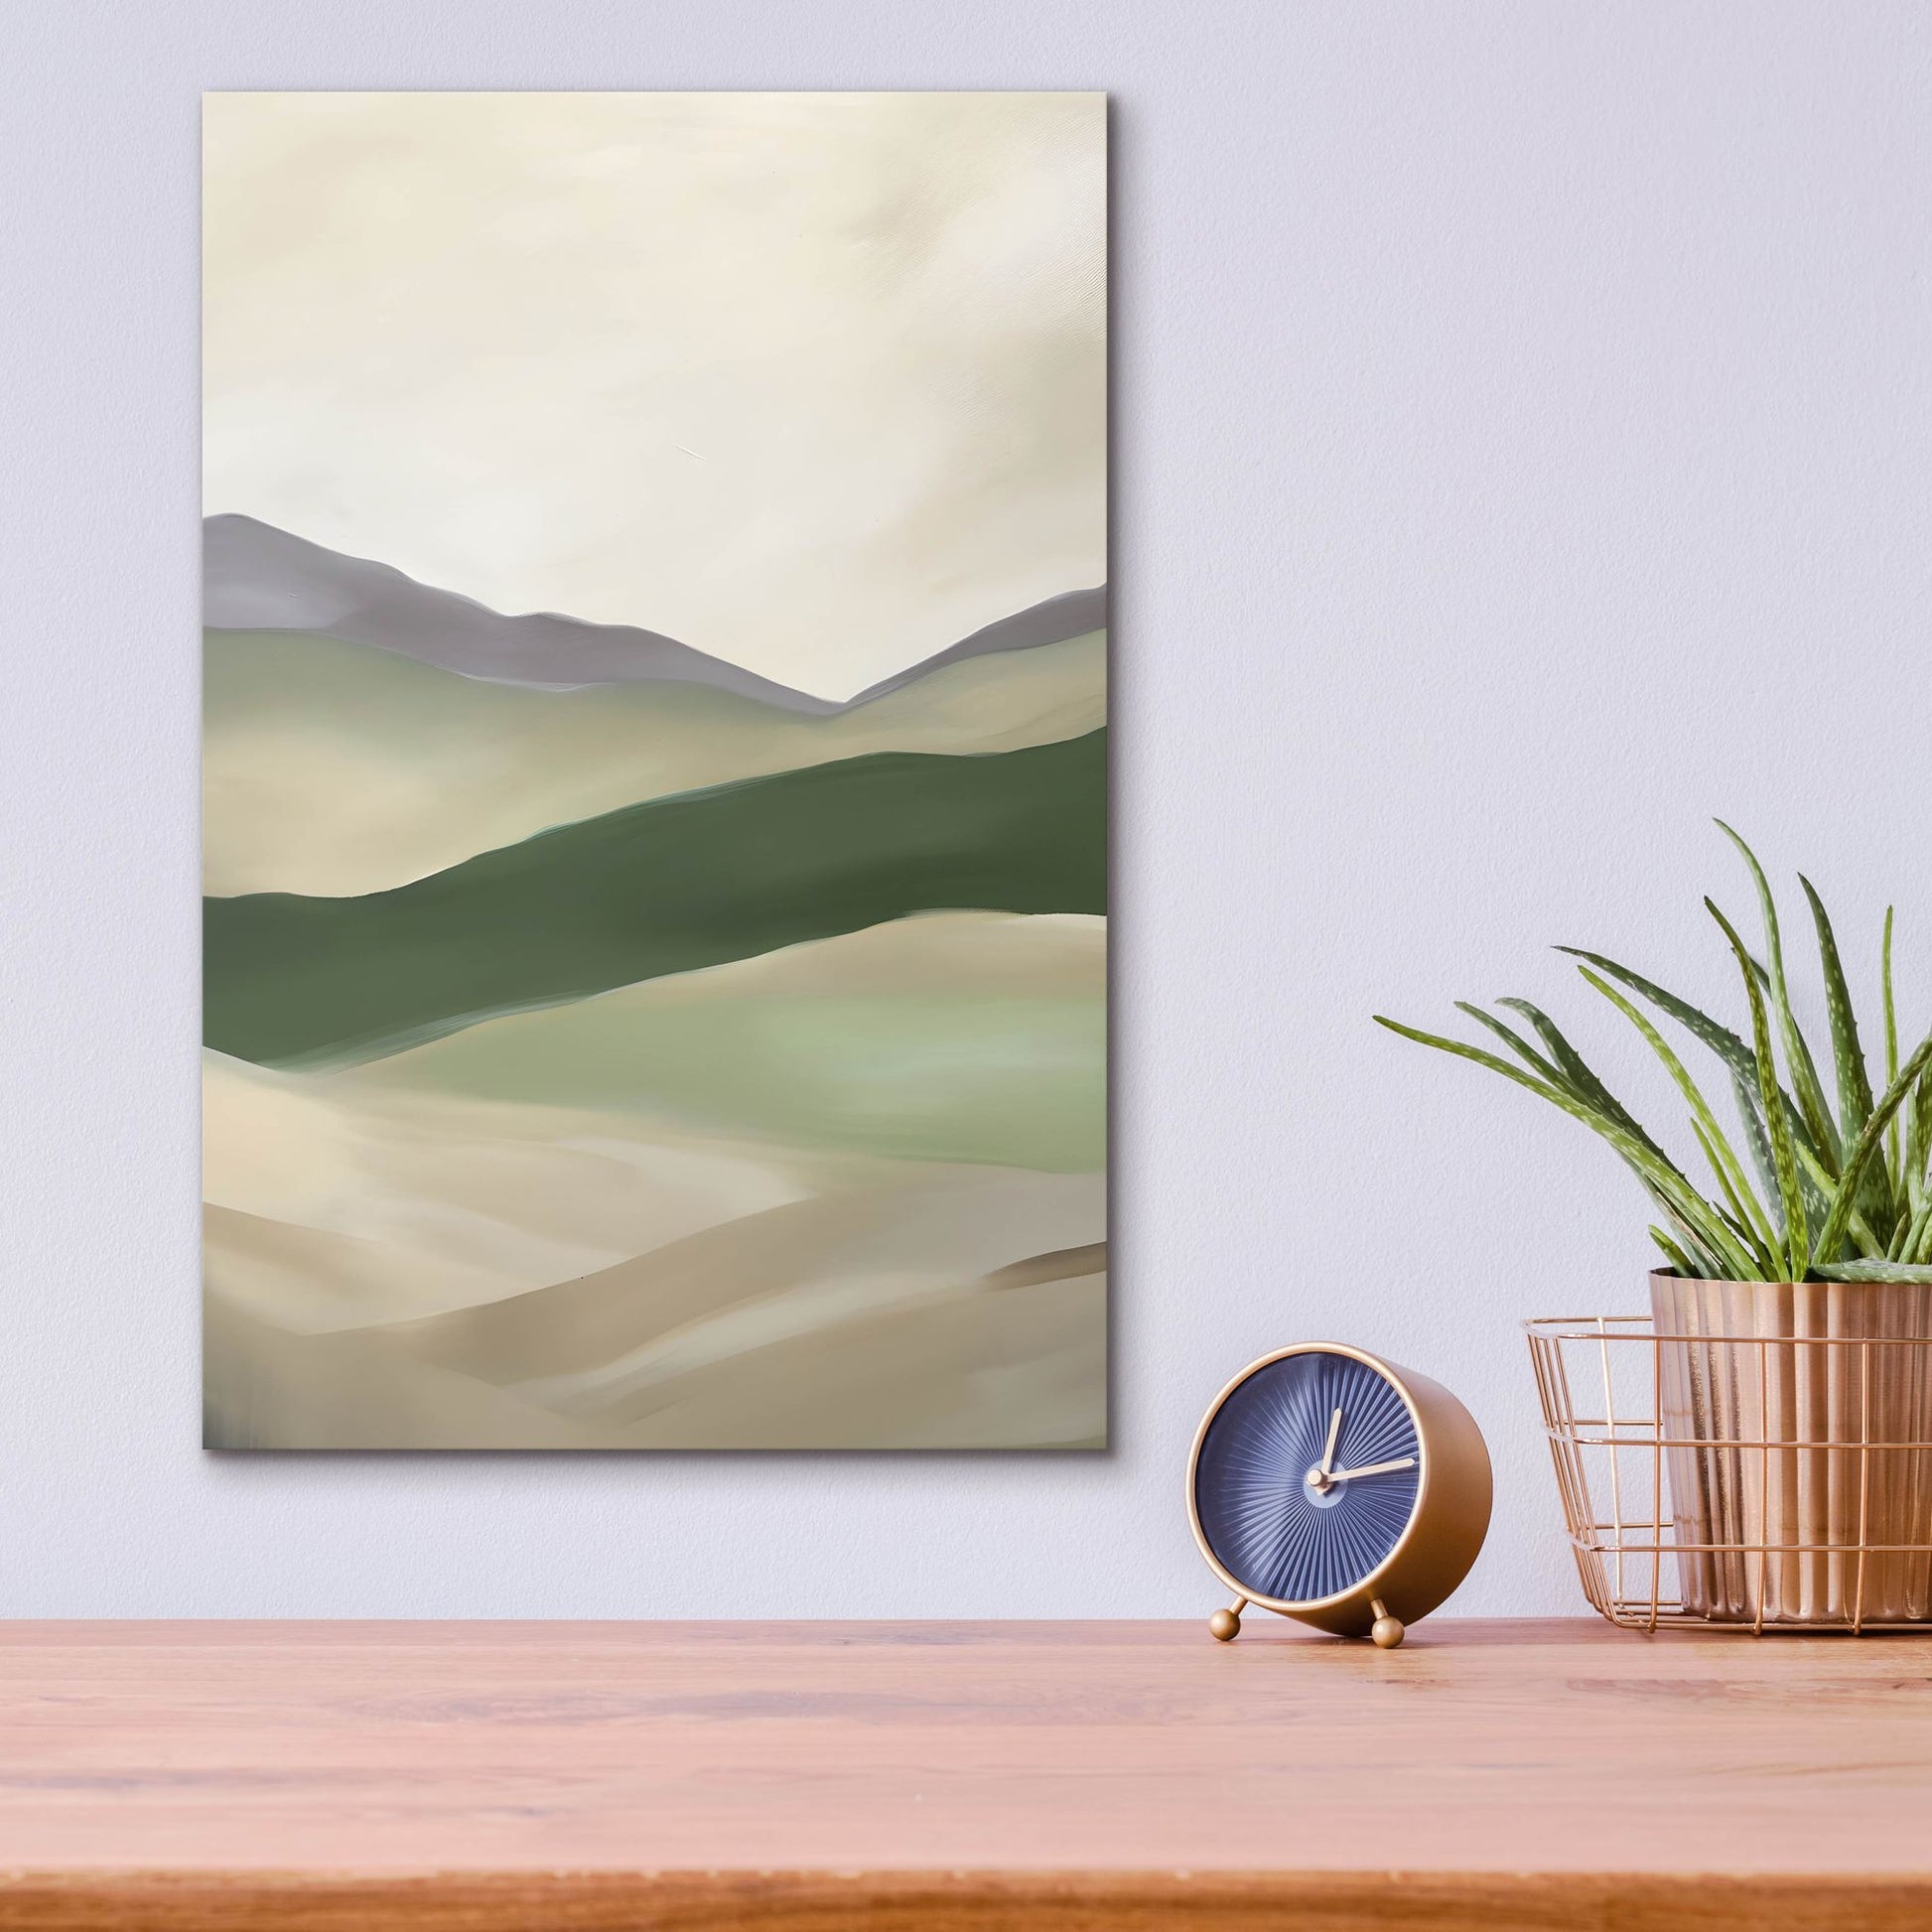 Epic Art 'Abstract Mountain 1' by Petals Prints Design, Acrylic Glass Wall Art,12x16